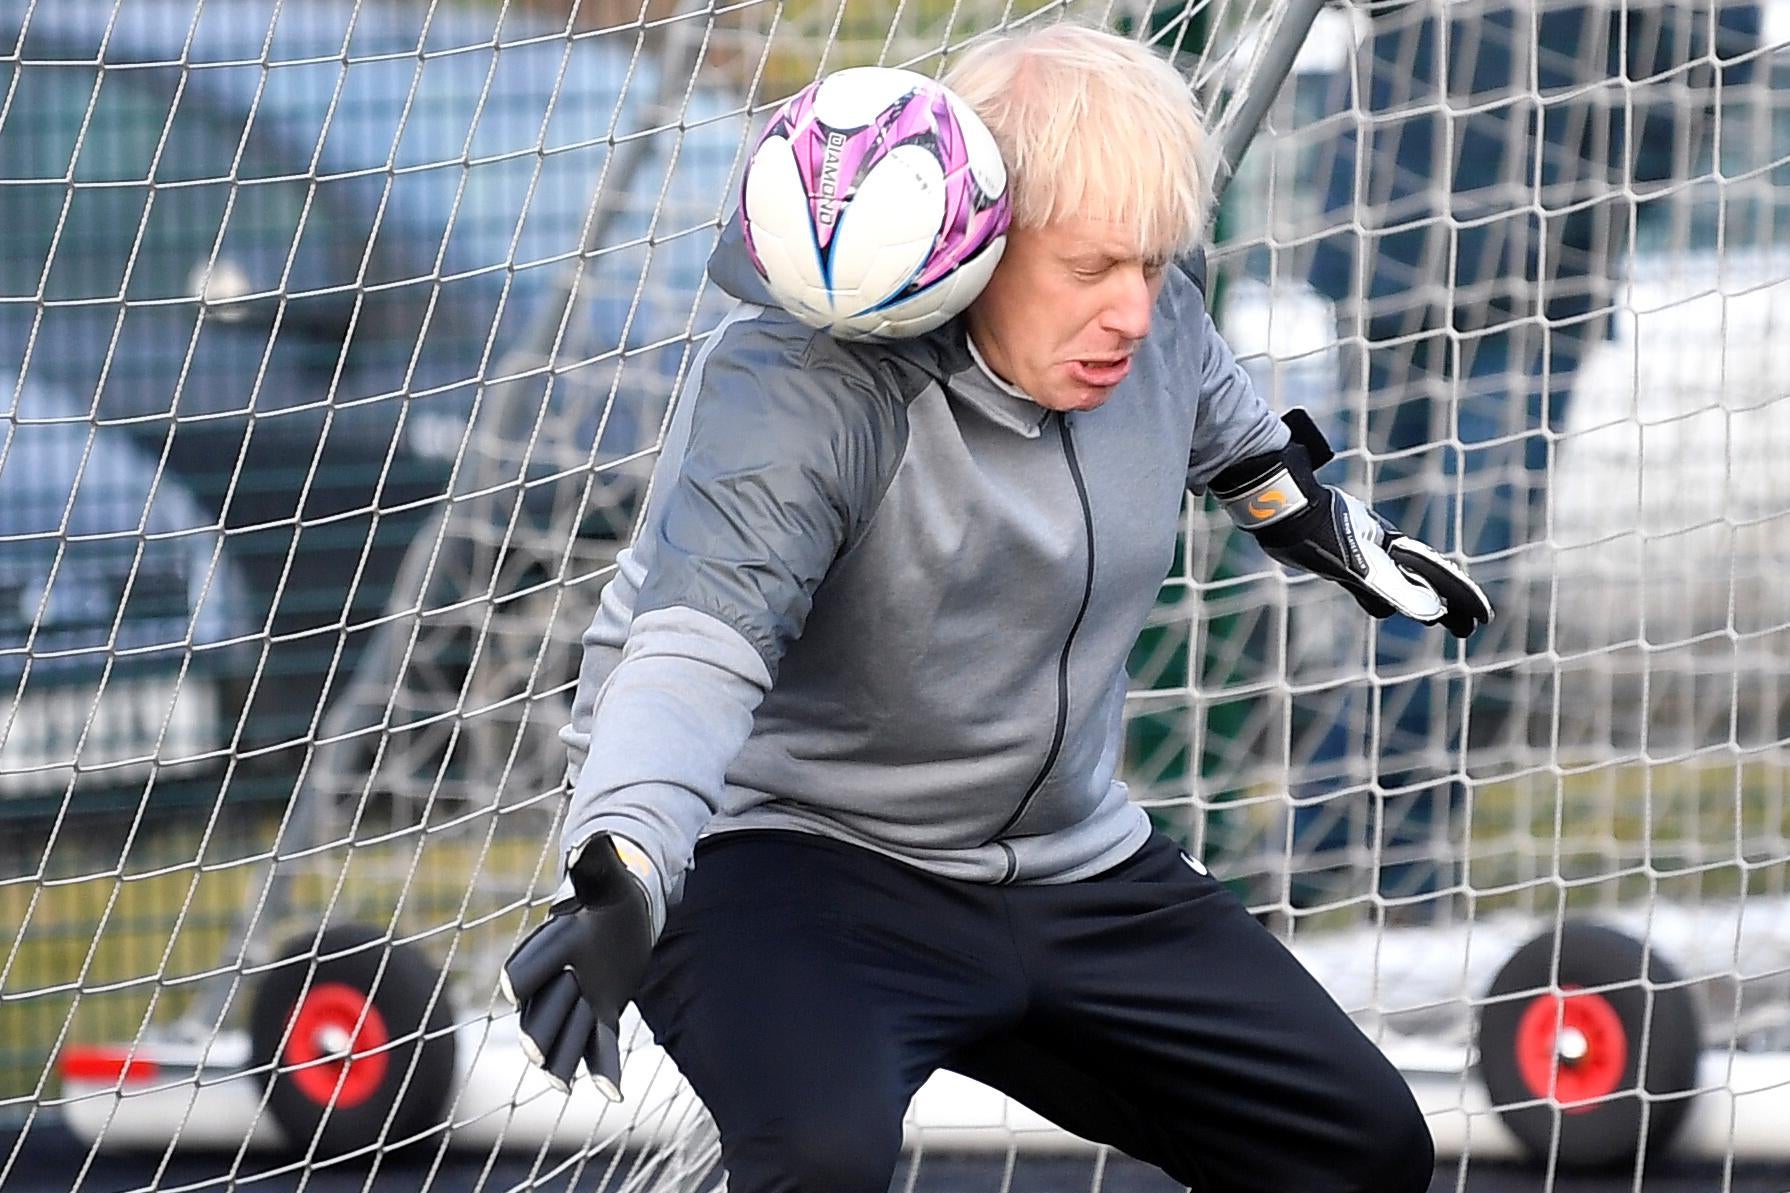 Boris Johnson gets hit in the head with a soccer ball while goalkeeping.